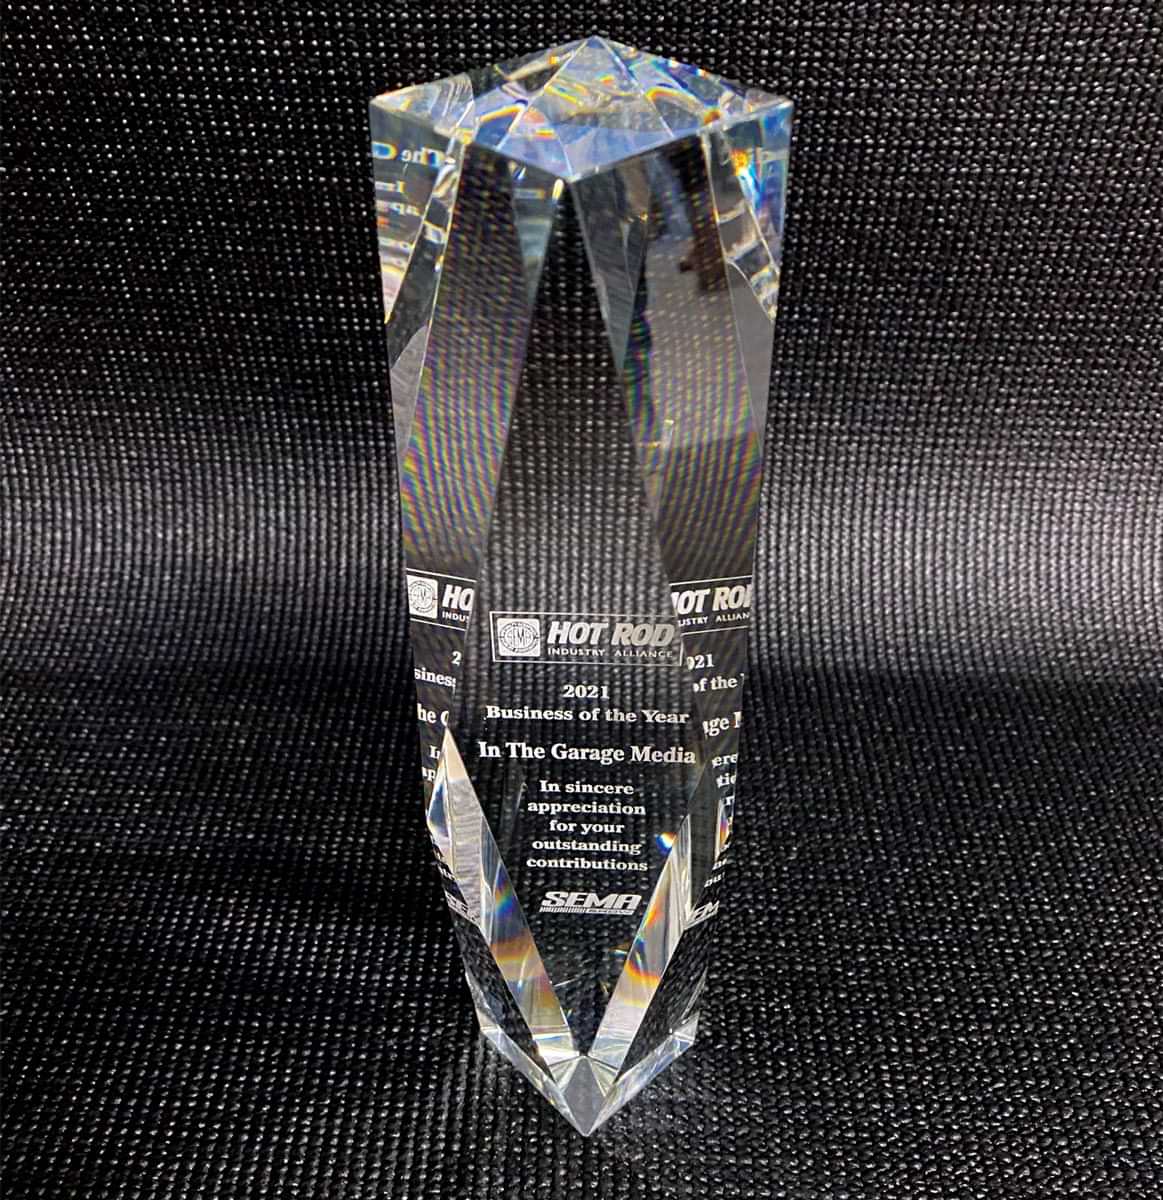 HRIA 2021 Business of the Year glass award